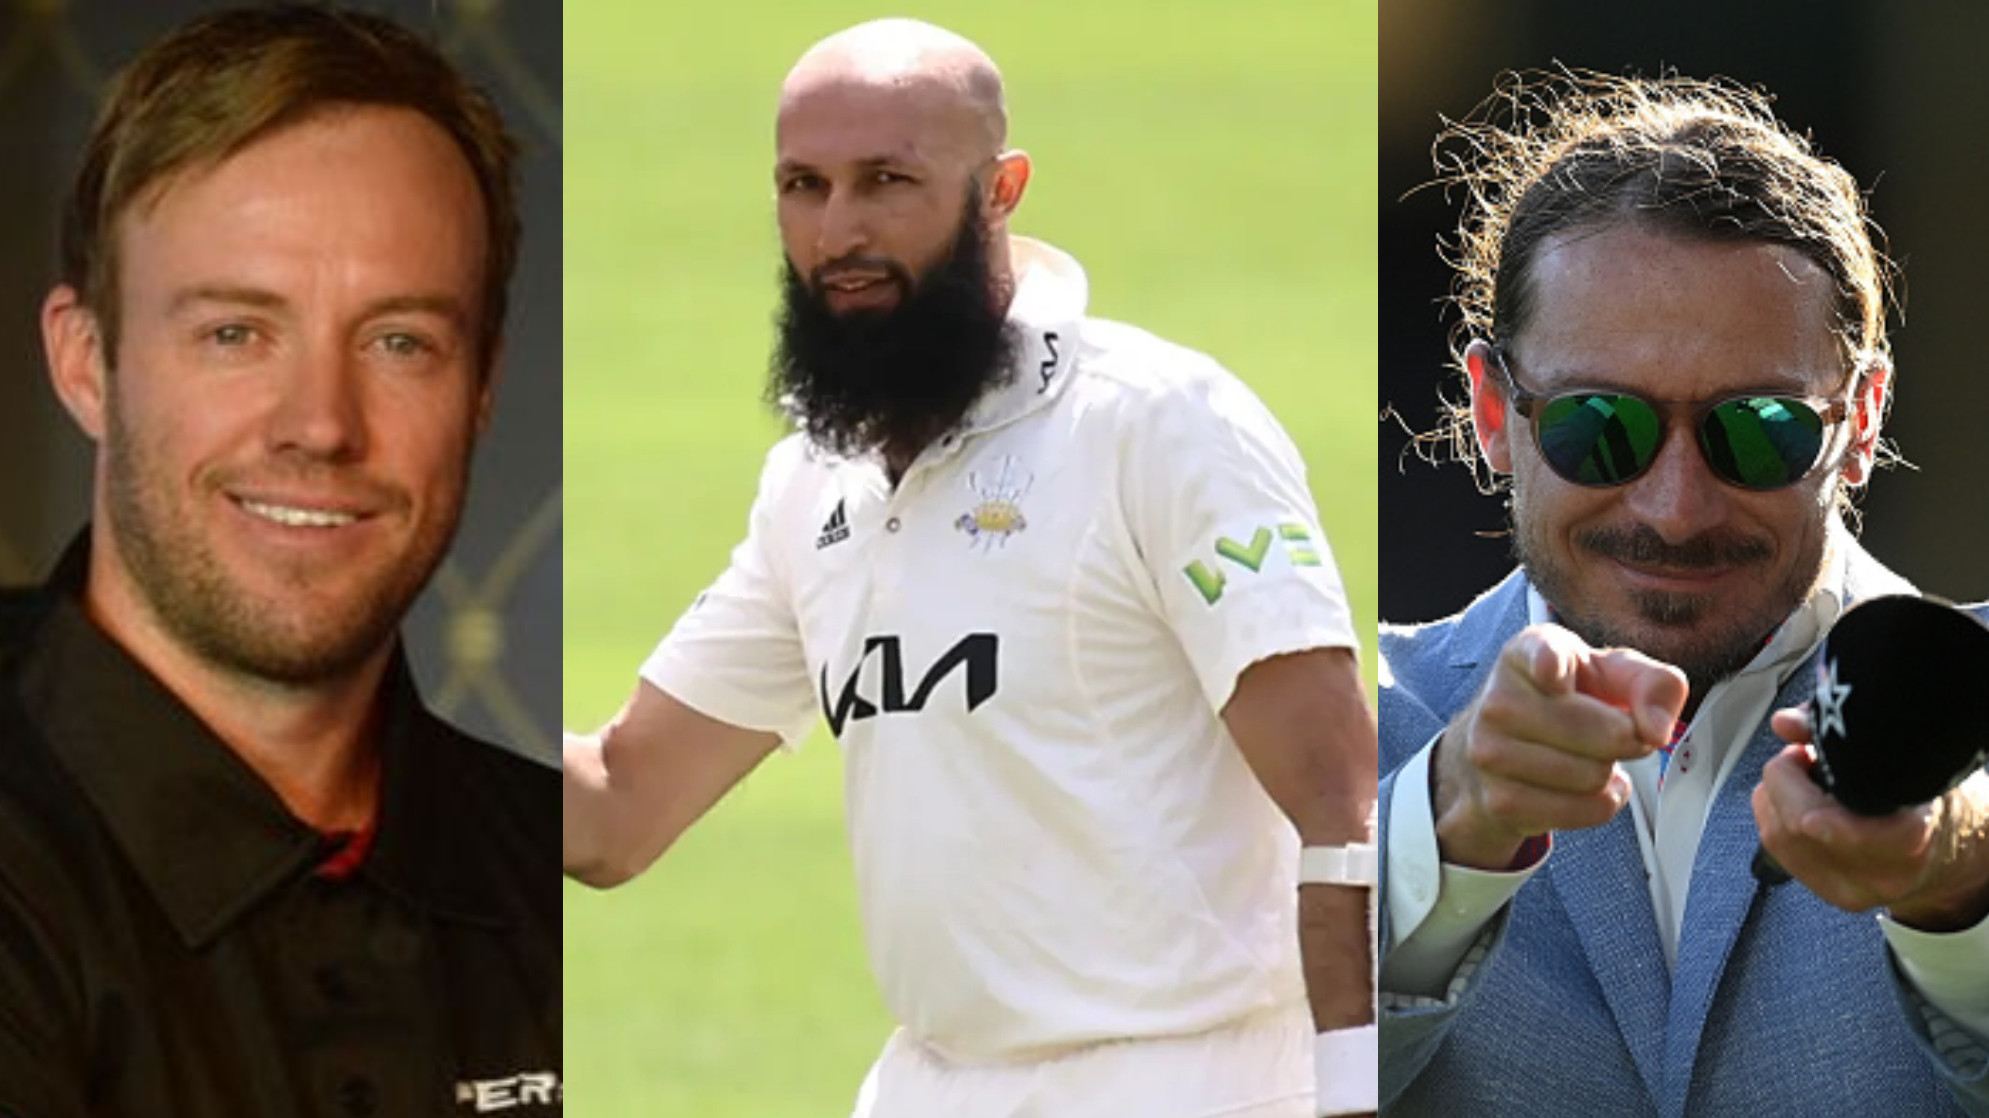 “We salute you!”- AB de Villiers and Dale Steyn pay rich tributes to Hashim Amla after he retires from all cricket